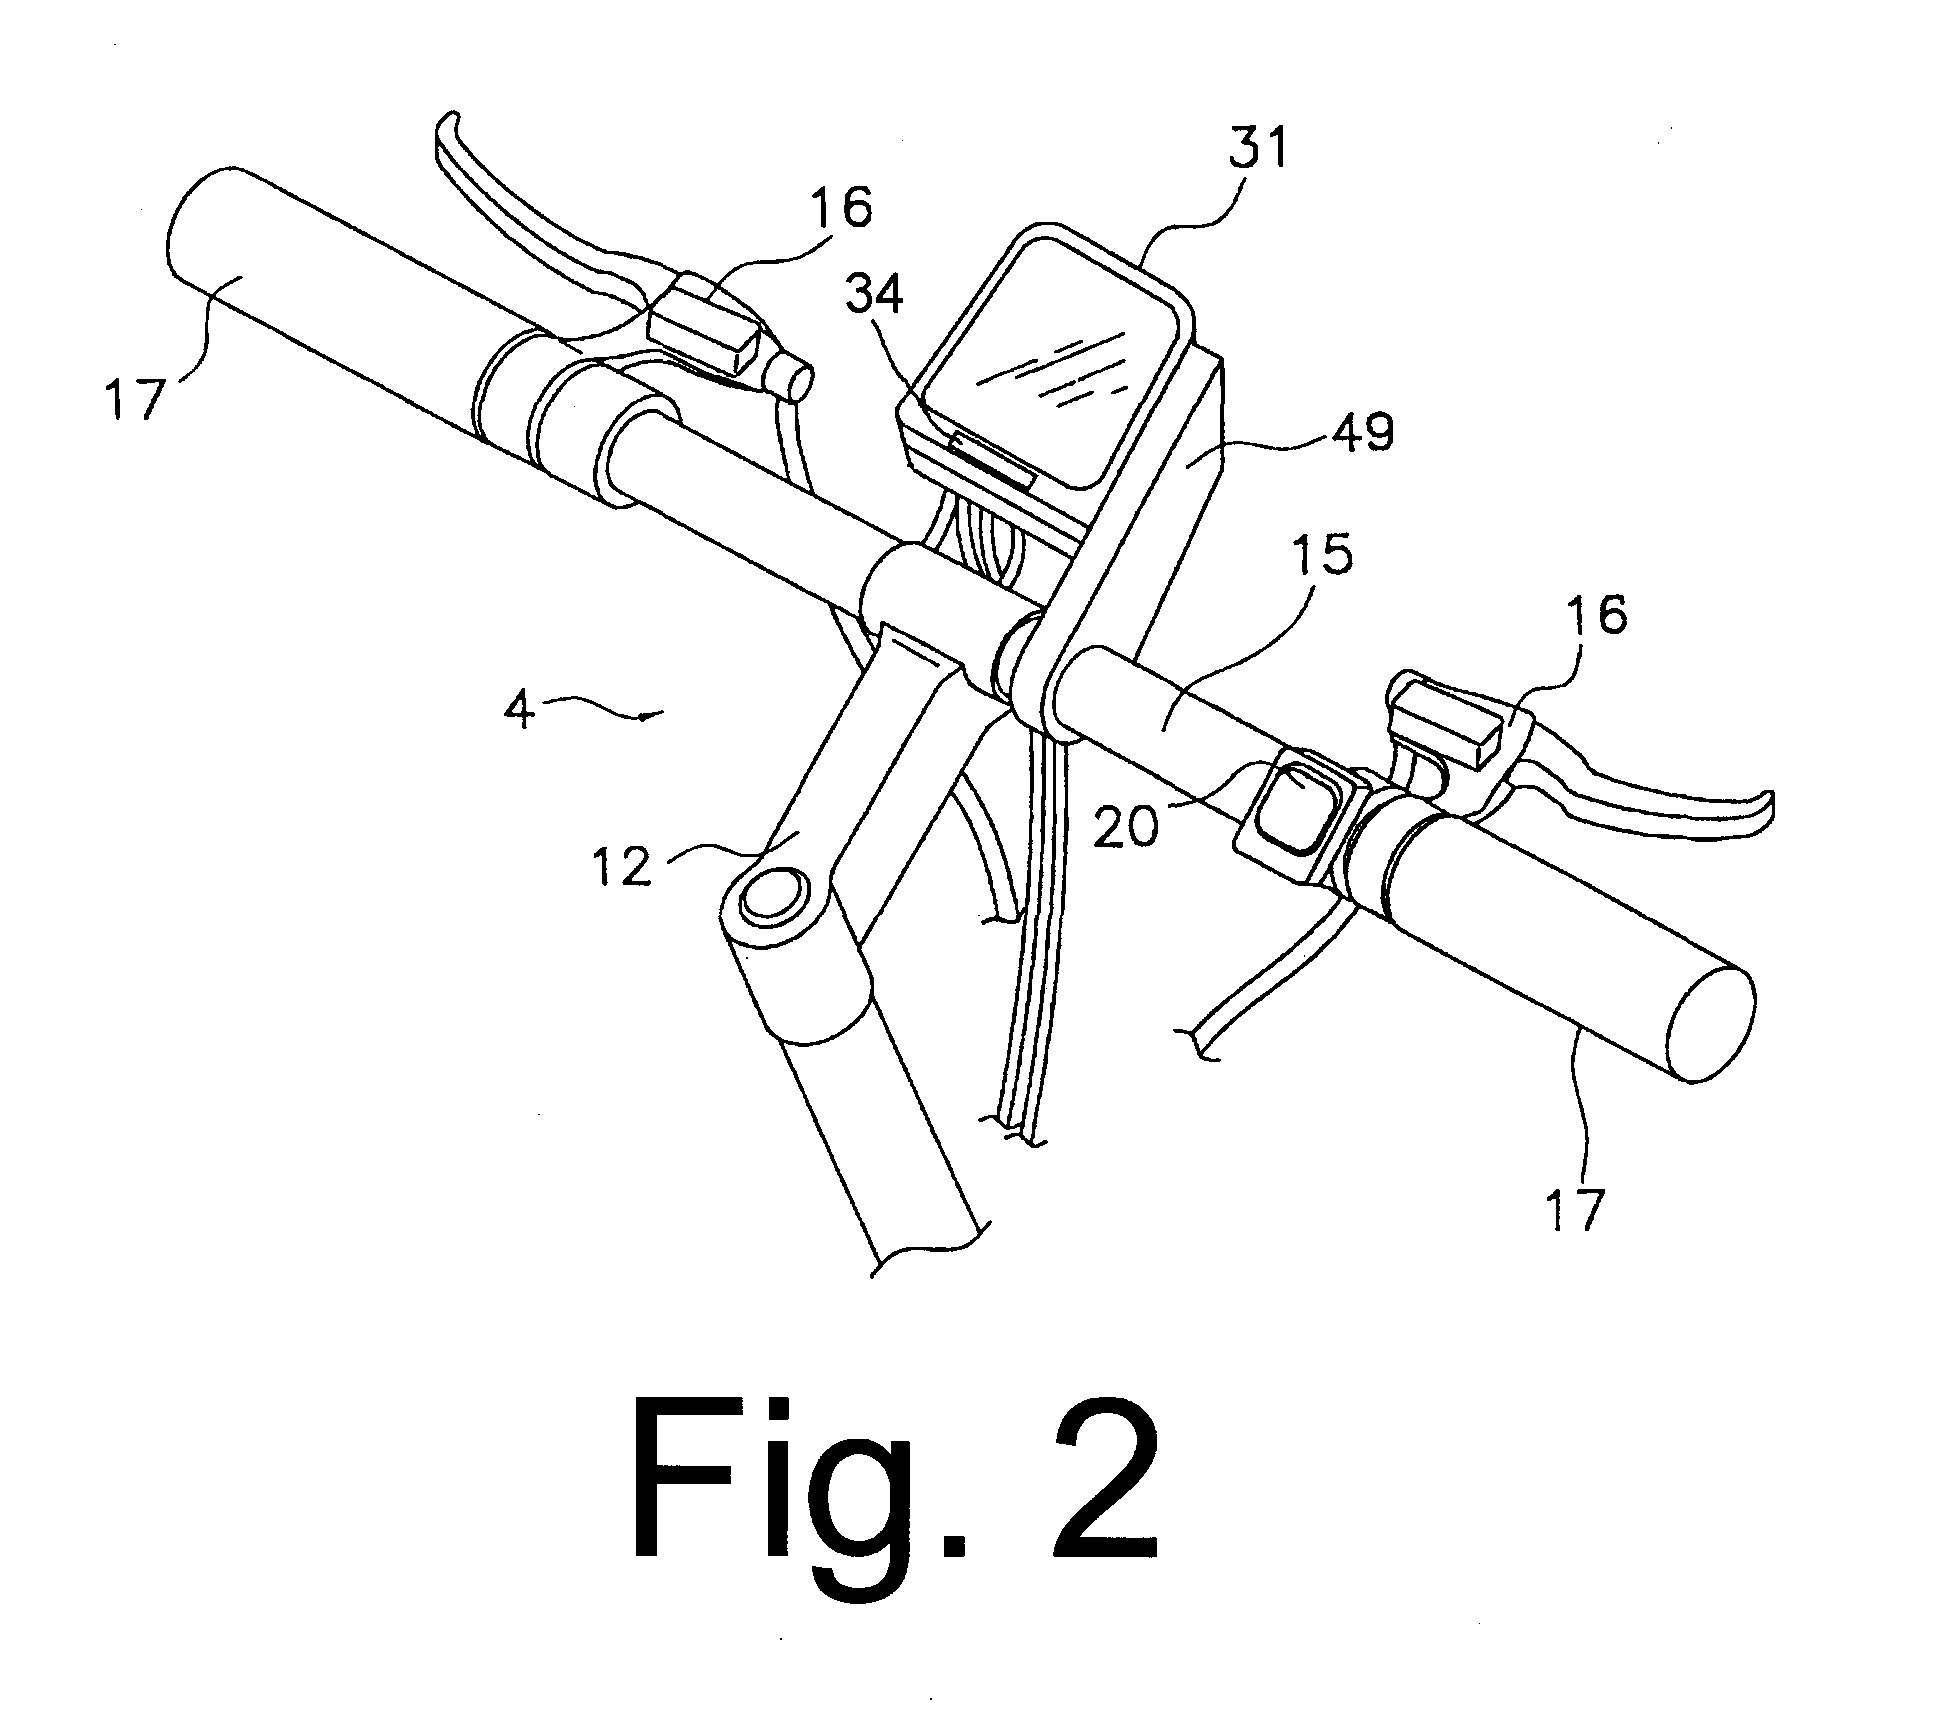 Bicycle shift control device that responds to a manually operated switch